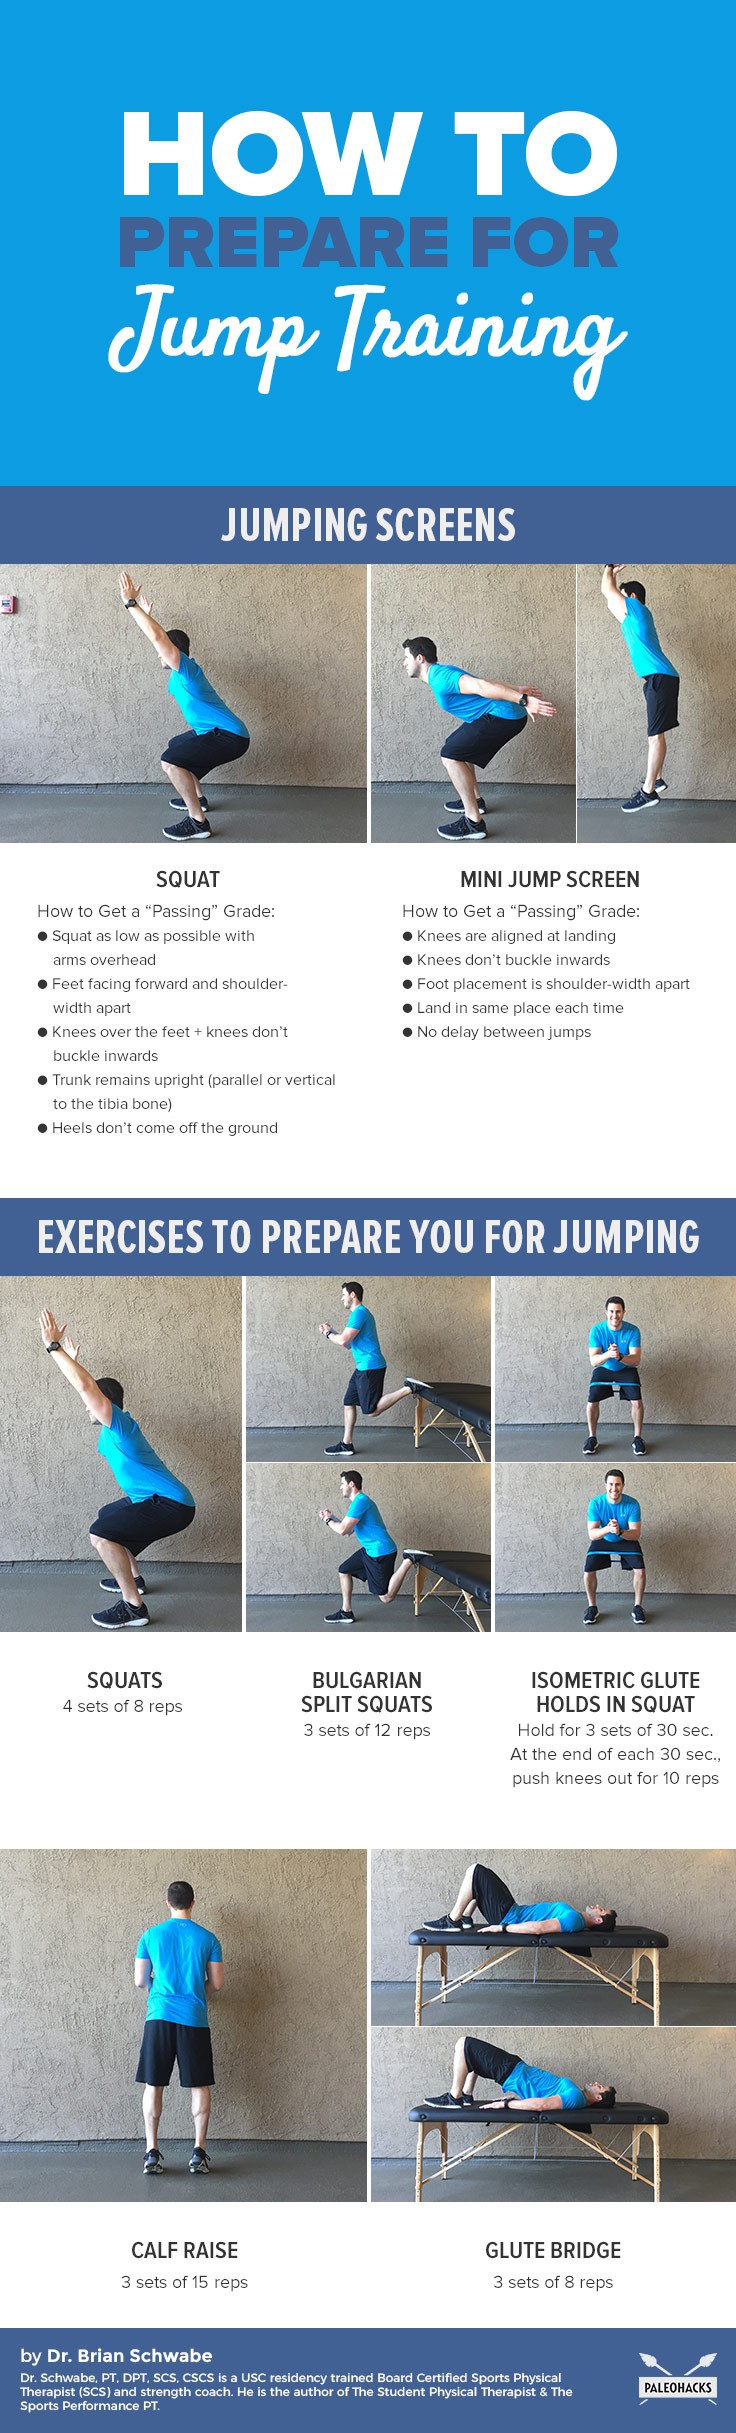 exercises to prepare you for jumping safely